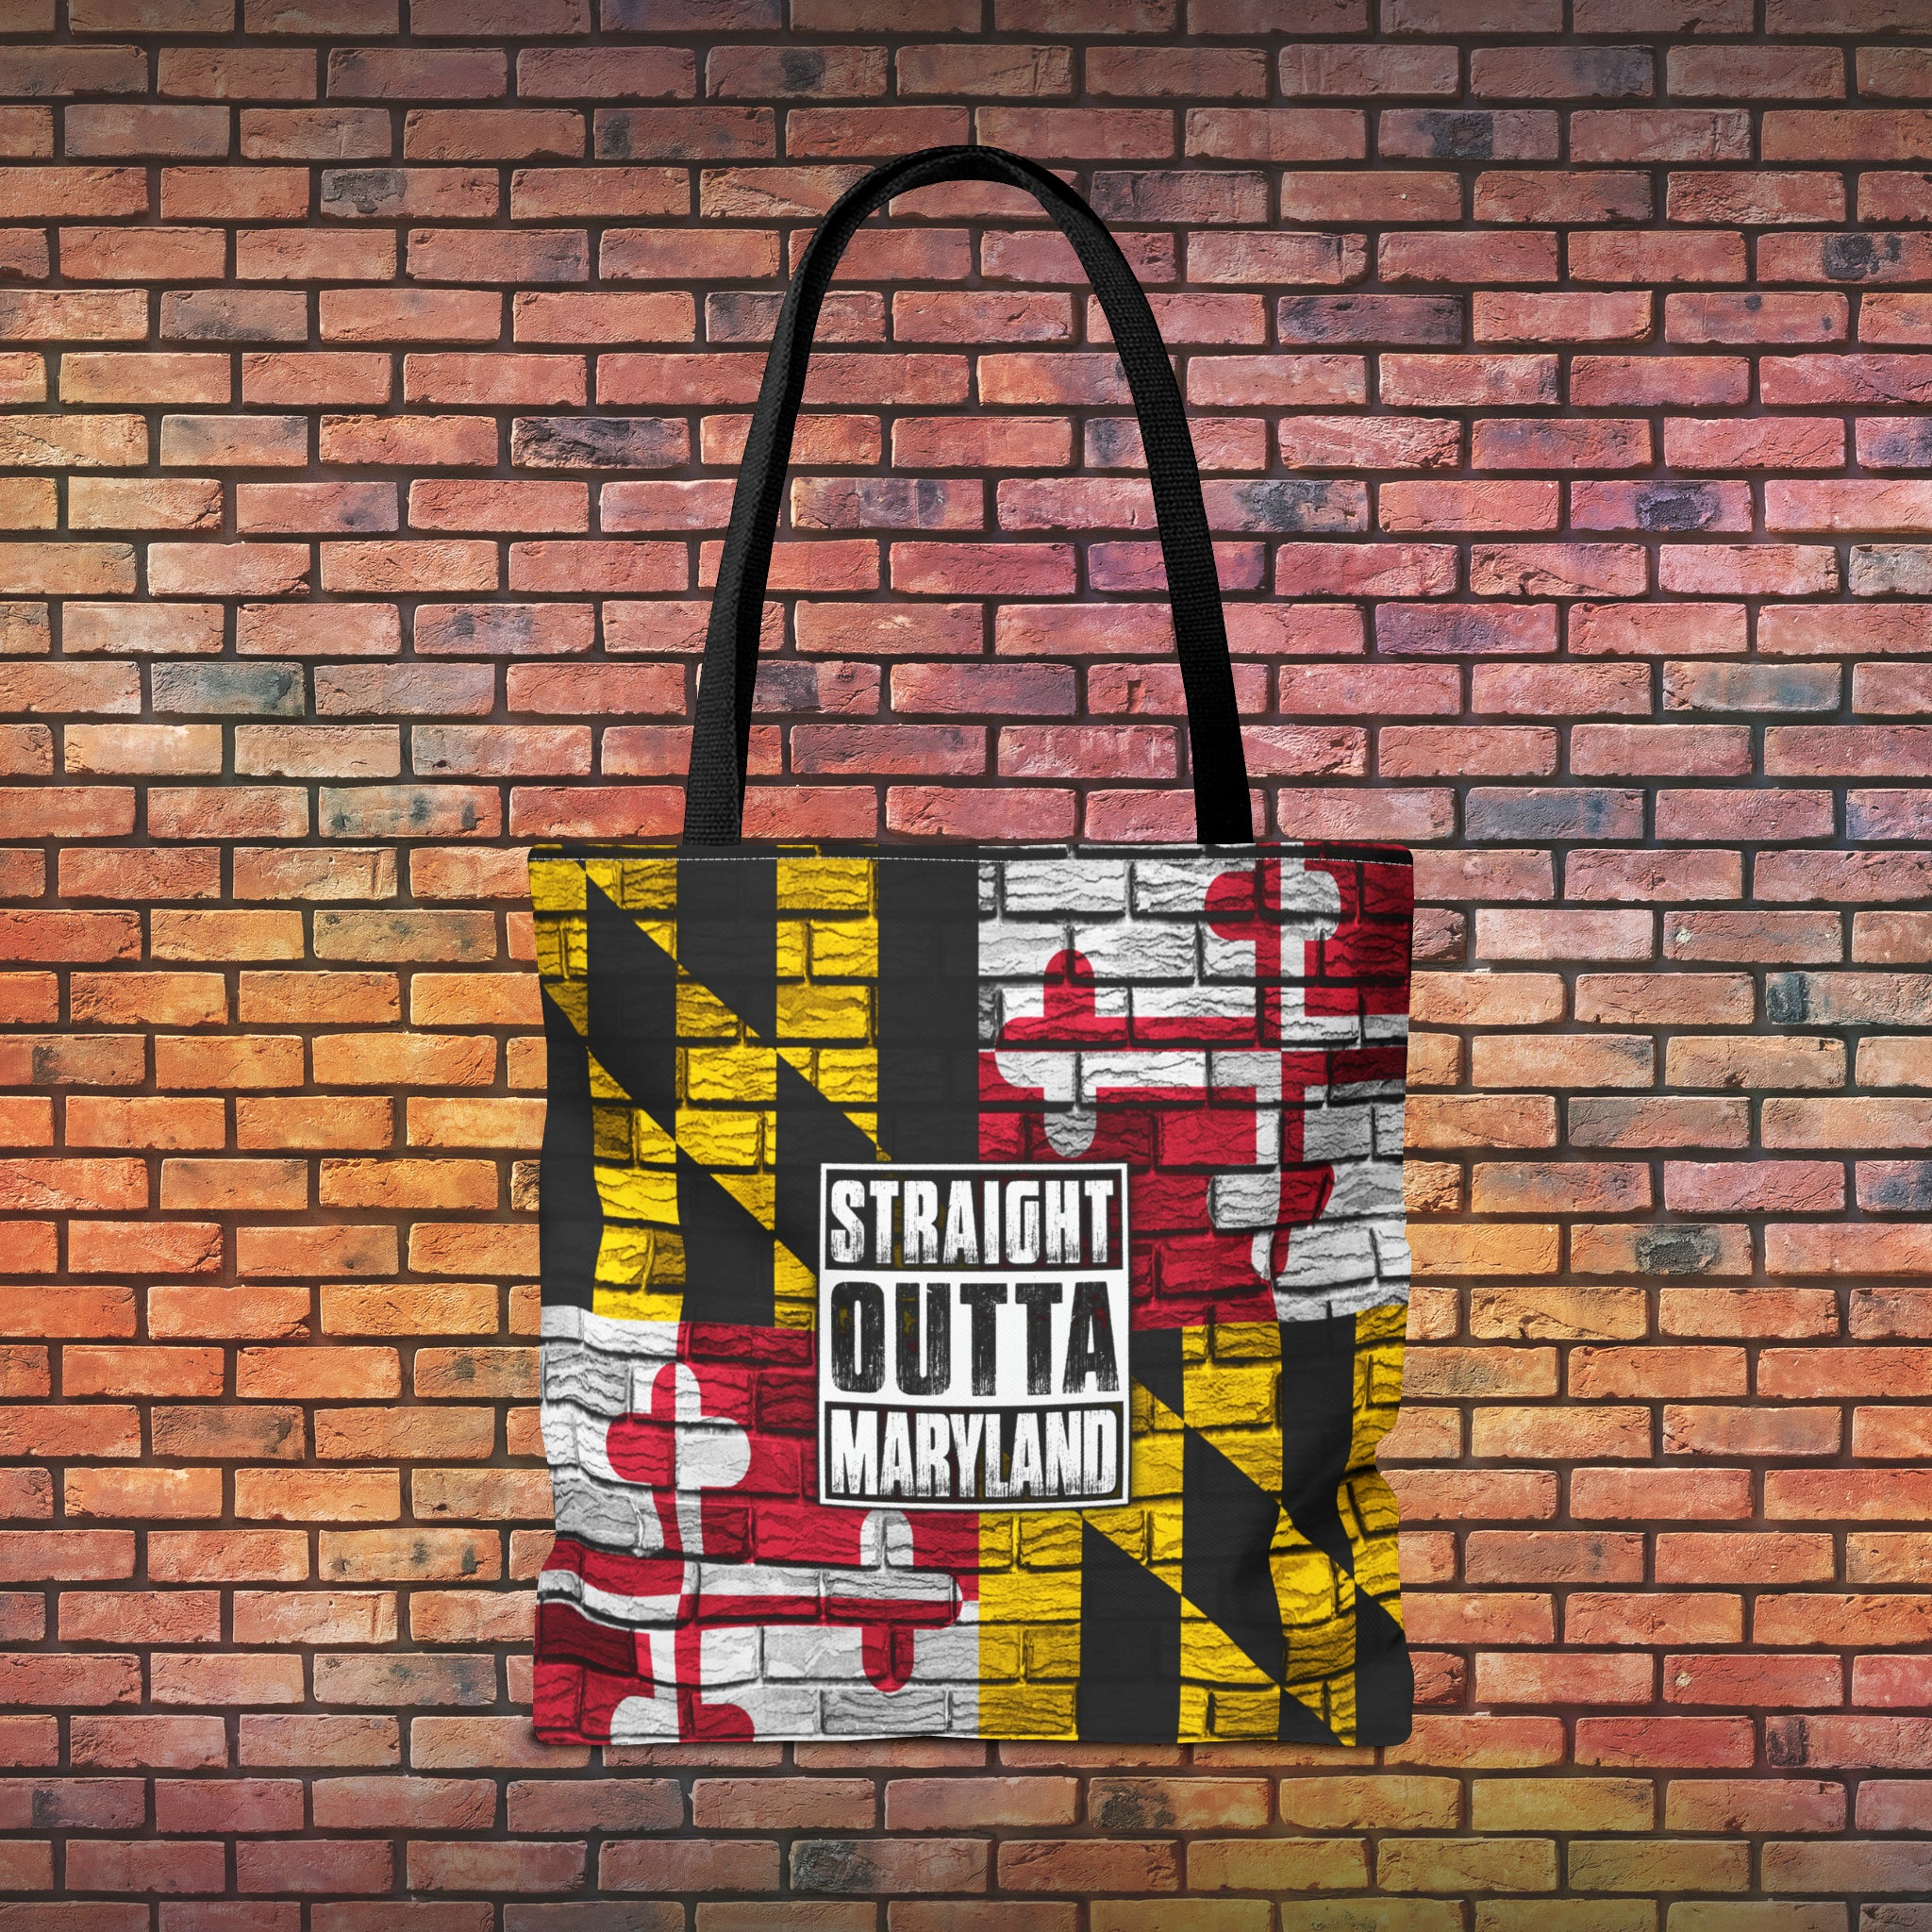 Straight Outta Maryland Shopping Bag | Shopping Tote for Marylanders